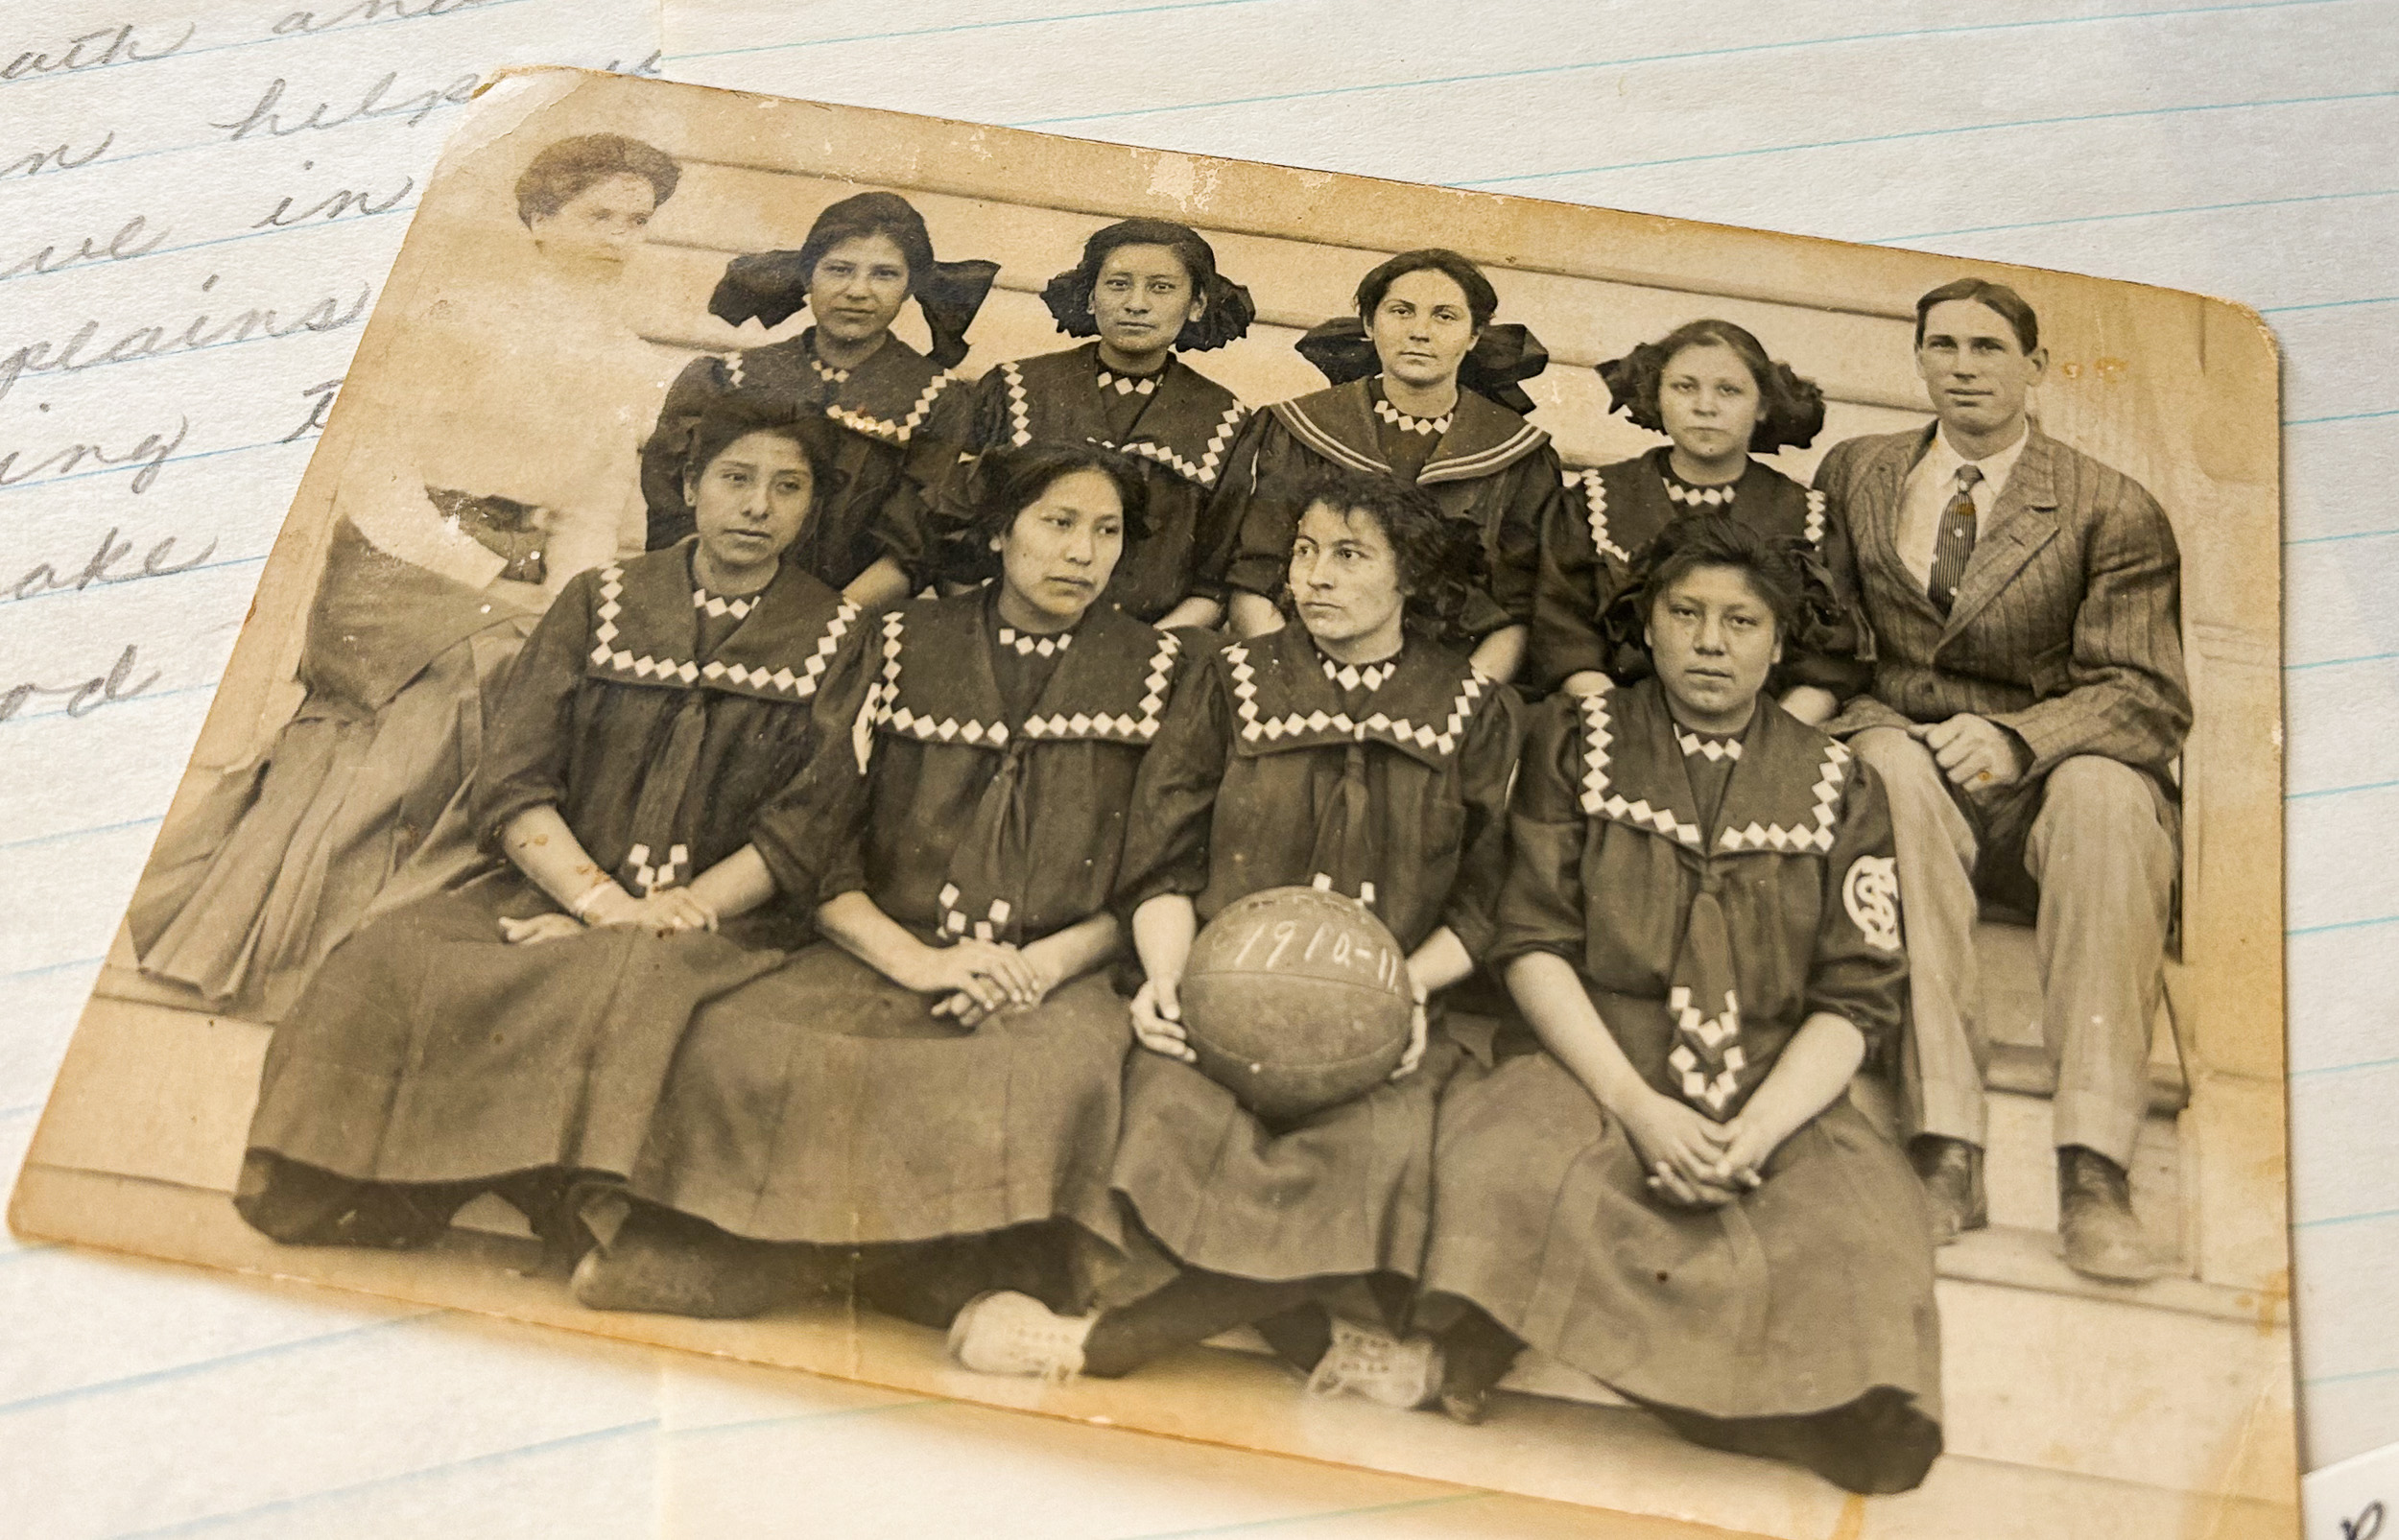 A black and white photo of eight Native American girls sitting together in black dresses.